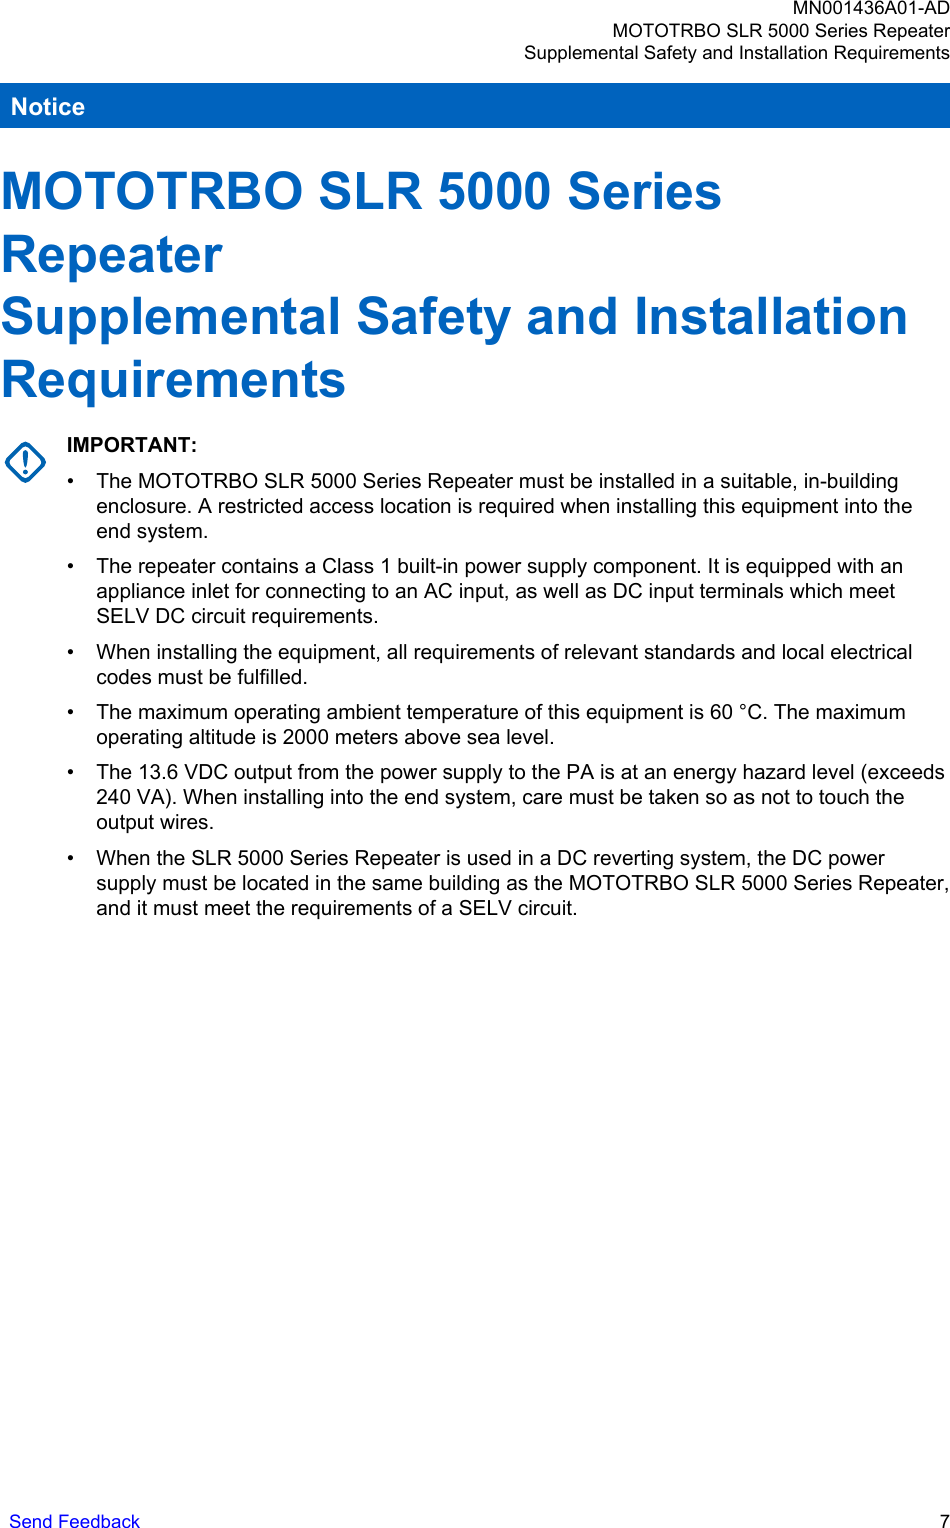 NoticeMOTOTRBO SLR 5000 SeriesRepeaterSupplemental Safety and InstallationRequirementsIMPORTANT:• The MOTOTRBO SLR 5000 Series Repeater must be installed in a suitable, in-buildingenclosure. A restricted access location is required when installing this equipment into theend system.• The repeater contains a Class 1 built-in power supply component. It is equipped with anappliance inlet for connecting to an AC input, as well as DC input terminals which meetSELV DC circuit requirements.• When installing the equipment, all requirements of relevant standards and local electricalcodes must be fulfilled.• The maximum operating ambient temperature of this equipment is 60 °C. The maximumoperating altitude is 2000 meters above sea level.• The 13.6 VDC output from the power supply to the PA is at an energy hazard level (exceeds240 VA). When installing into the end system, care must be taken so as not to touch theoutput wires.• When the SLR 5000 Series Repeater is used in a DC reverting system, the DC powersupply must be located in the same building as the MOTOTRBO SLR 5000 Series Repeater,and it must meet the requirements of a SELV circuit.MN001436A01-ADMOTOTRBO SLR 5000 Series RepeaterSupplemental Safety and Installation RequirementsSend Feedback   7